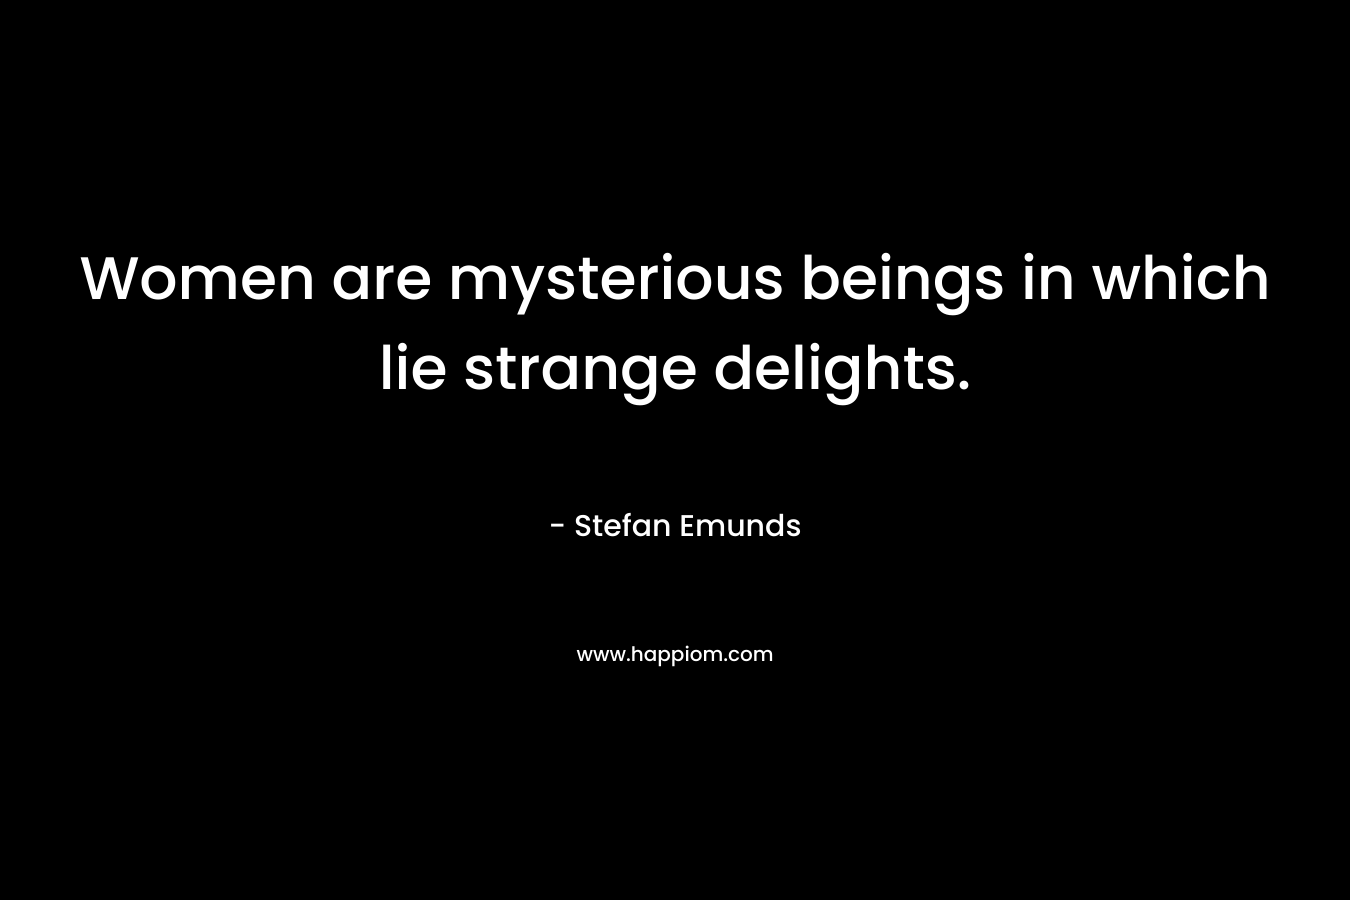 Women are mysterious beings in which lie strange delights. – Stefan Emunds